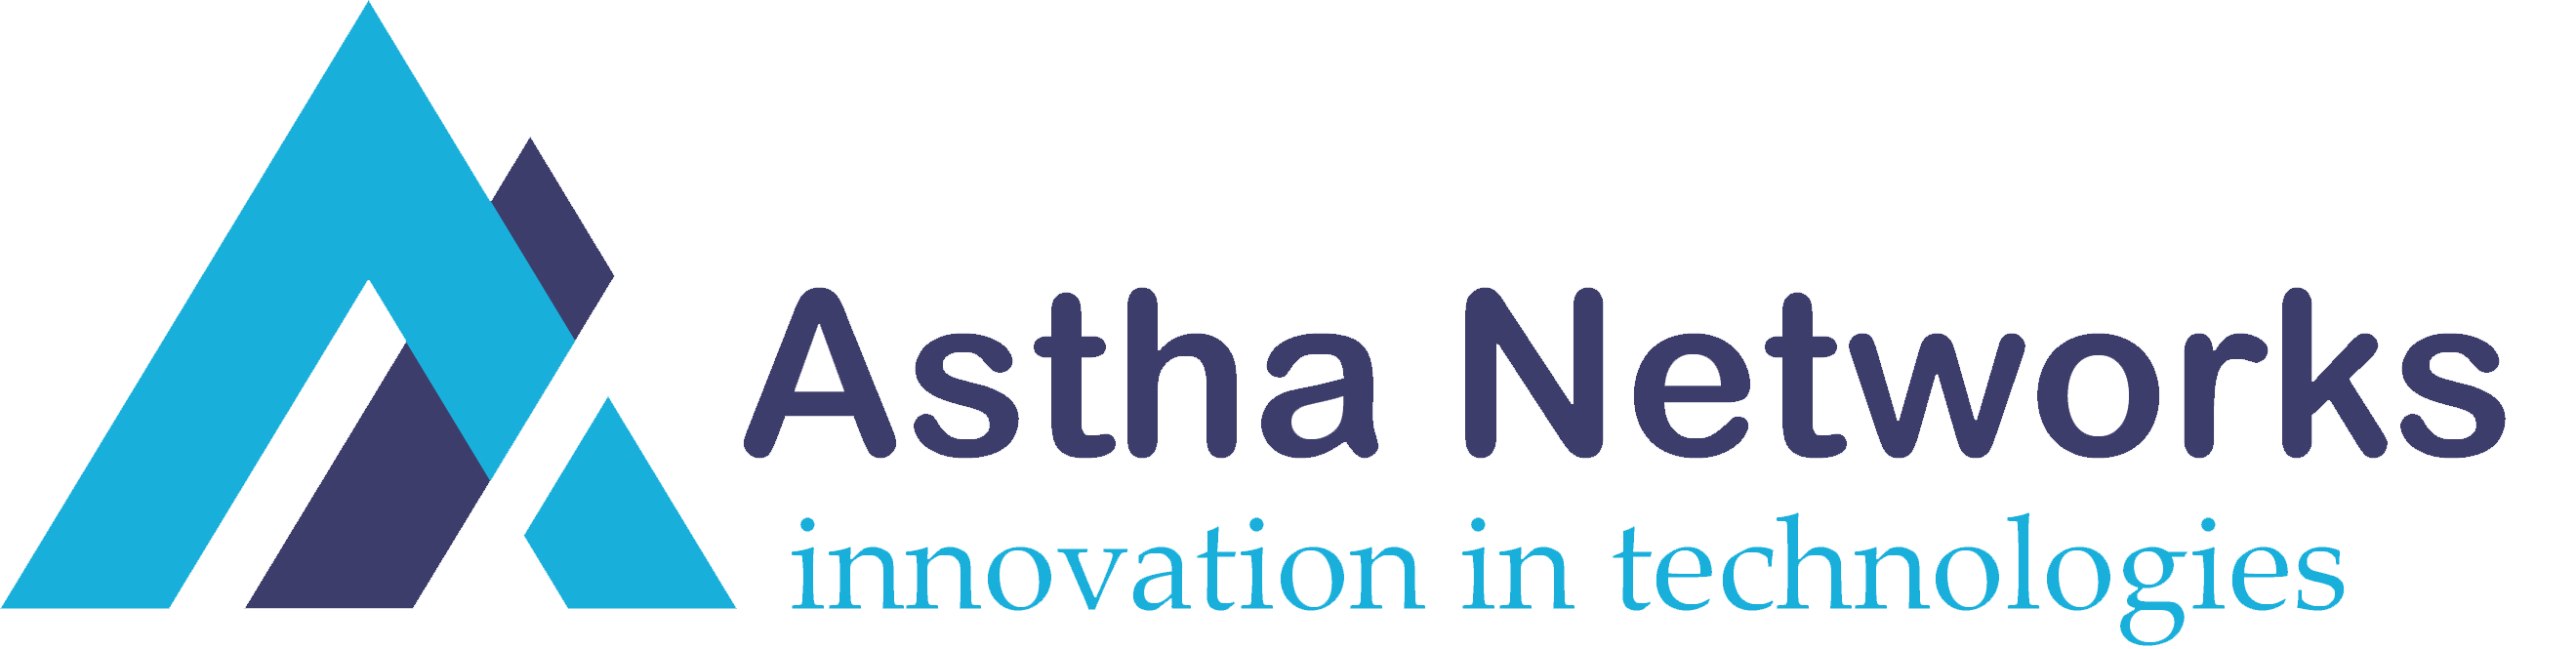 Astha - Postlor Interactive India Private Limited